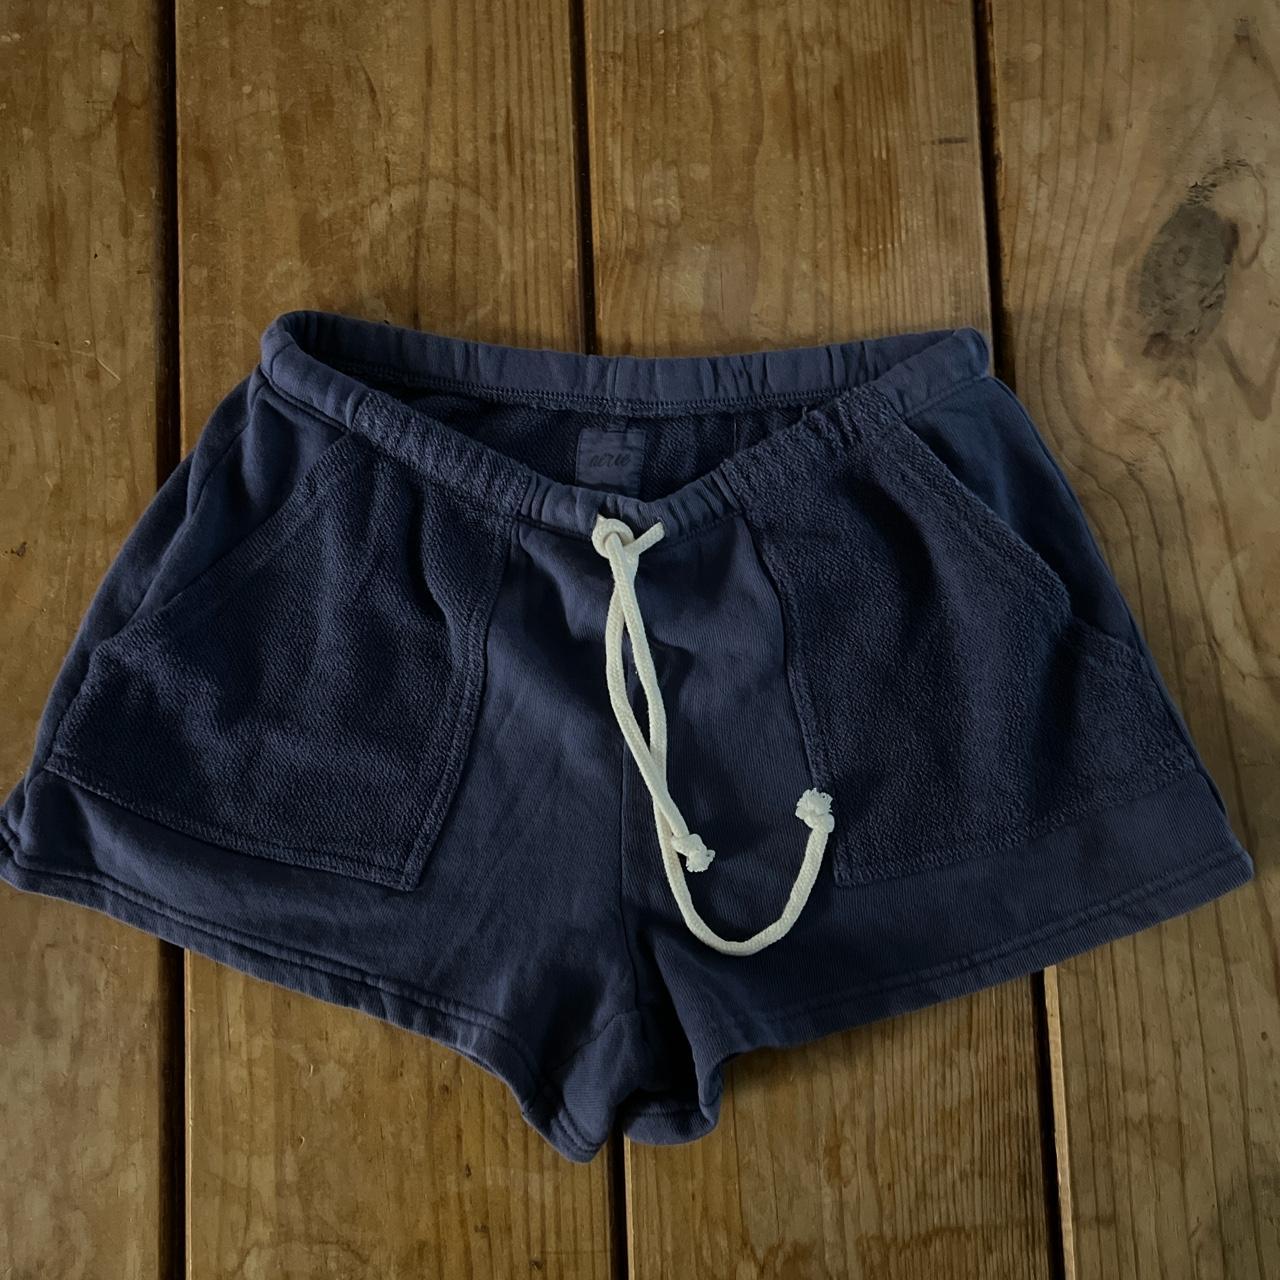 Aerie Women's Navy and Blue Shorts